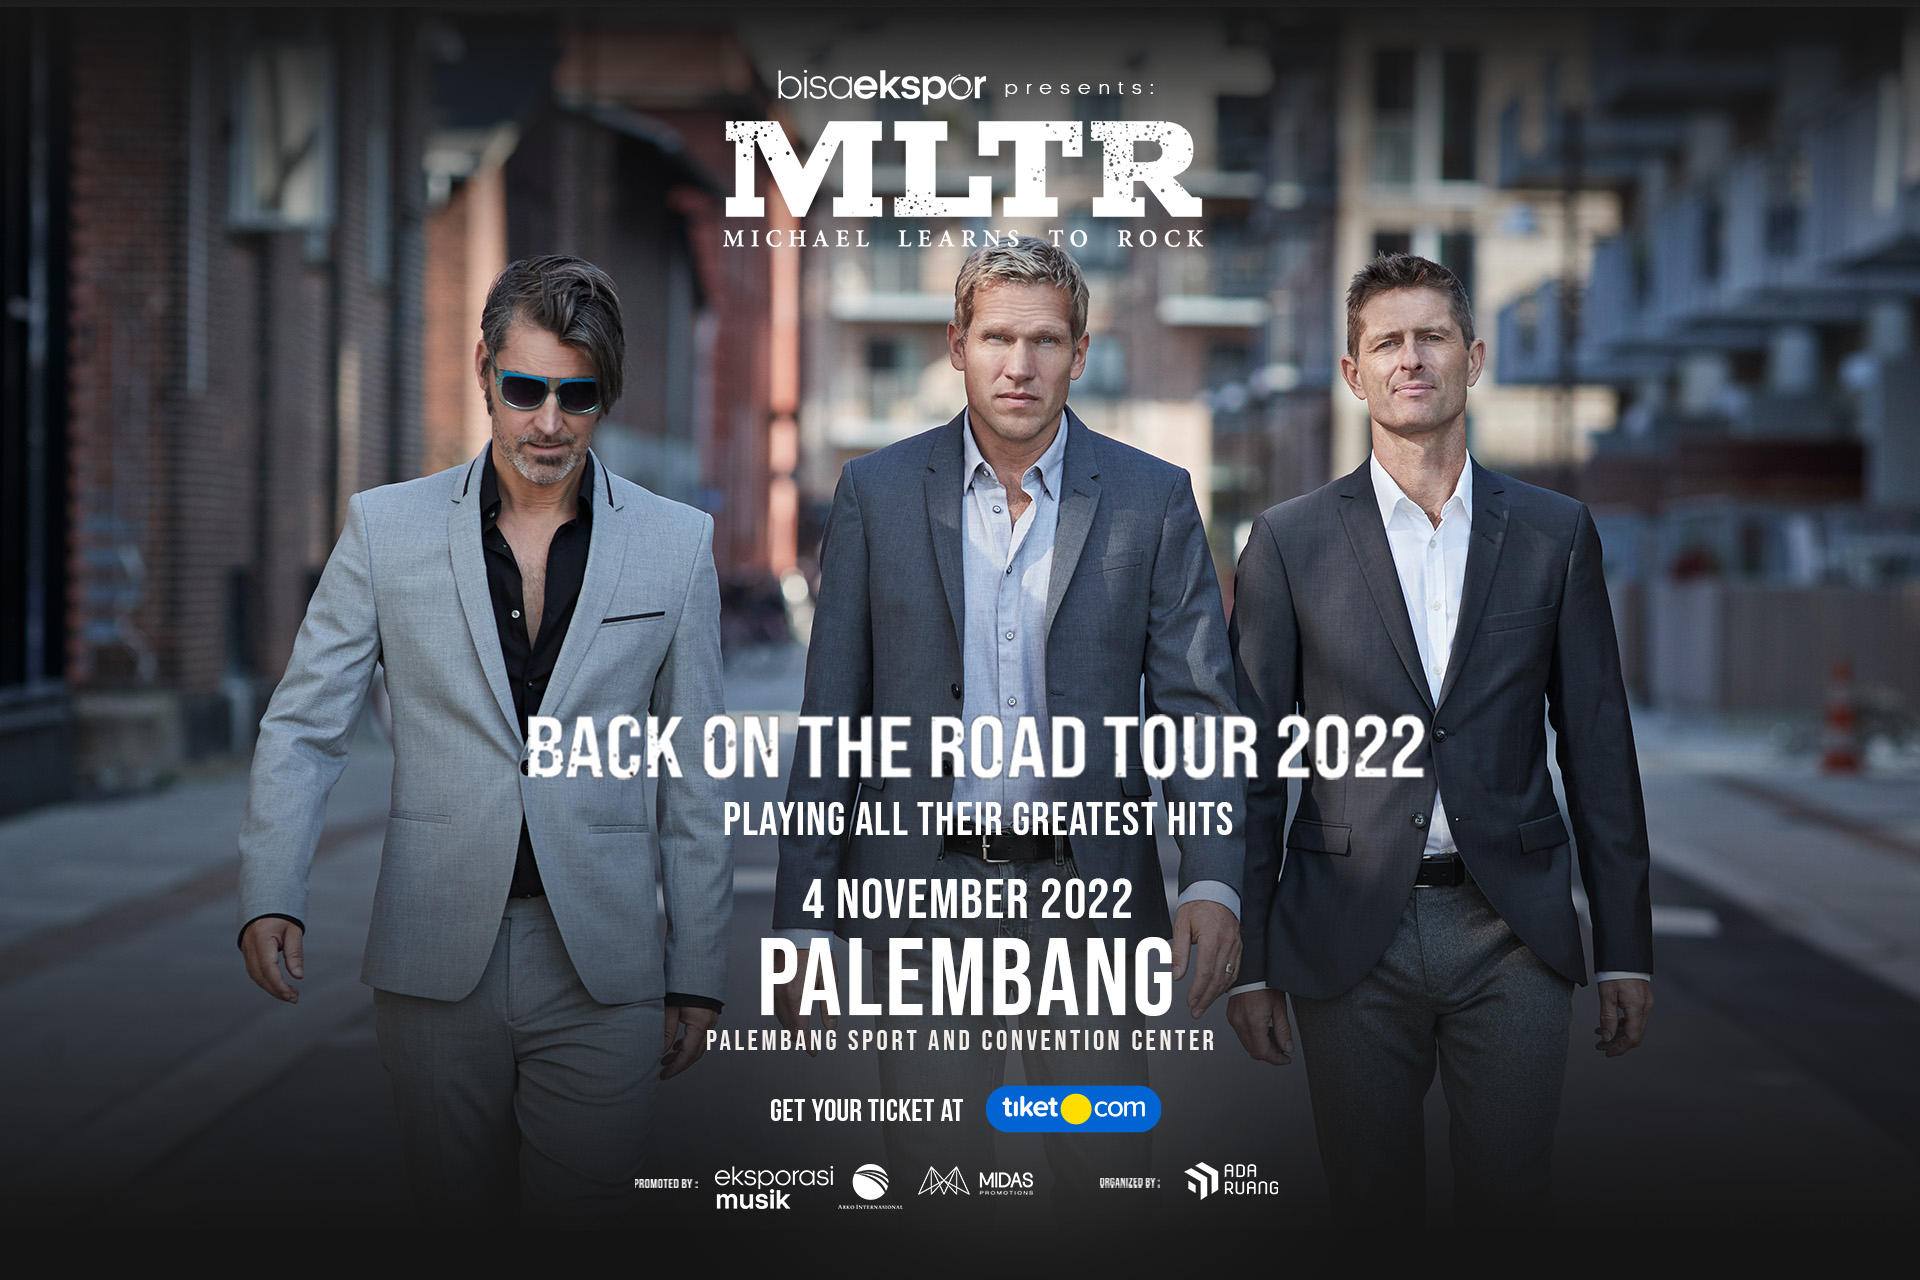 mltr tour indonesia